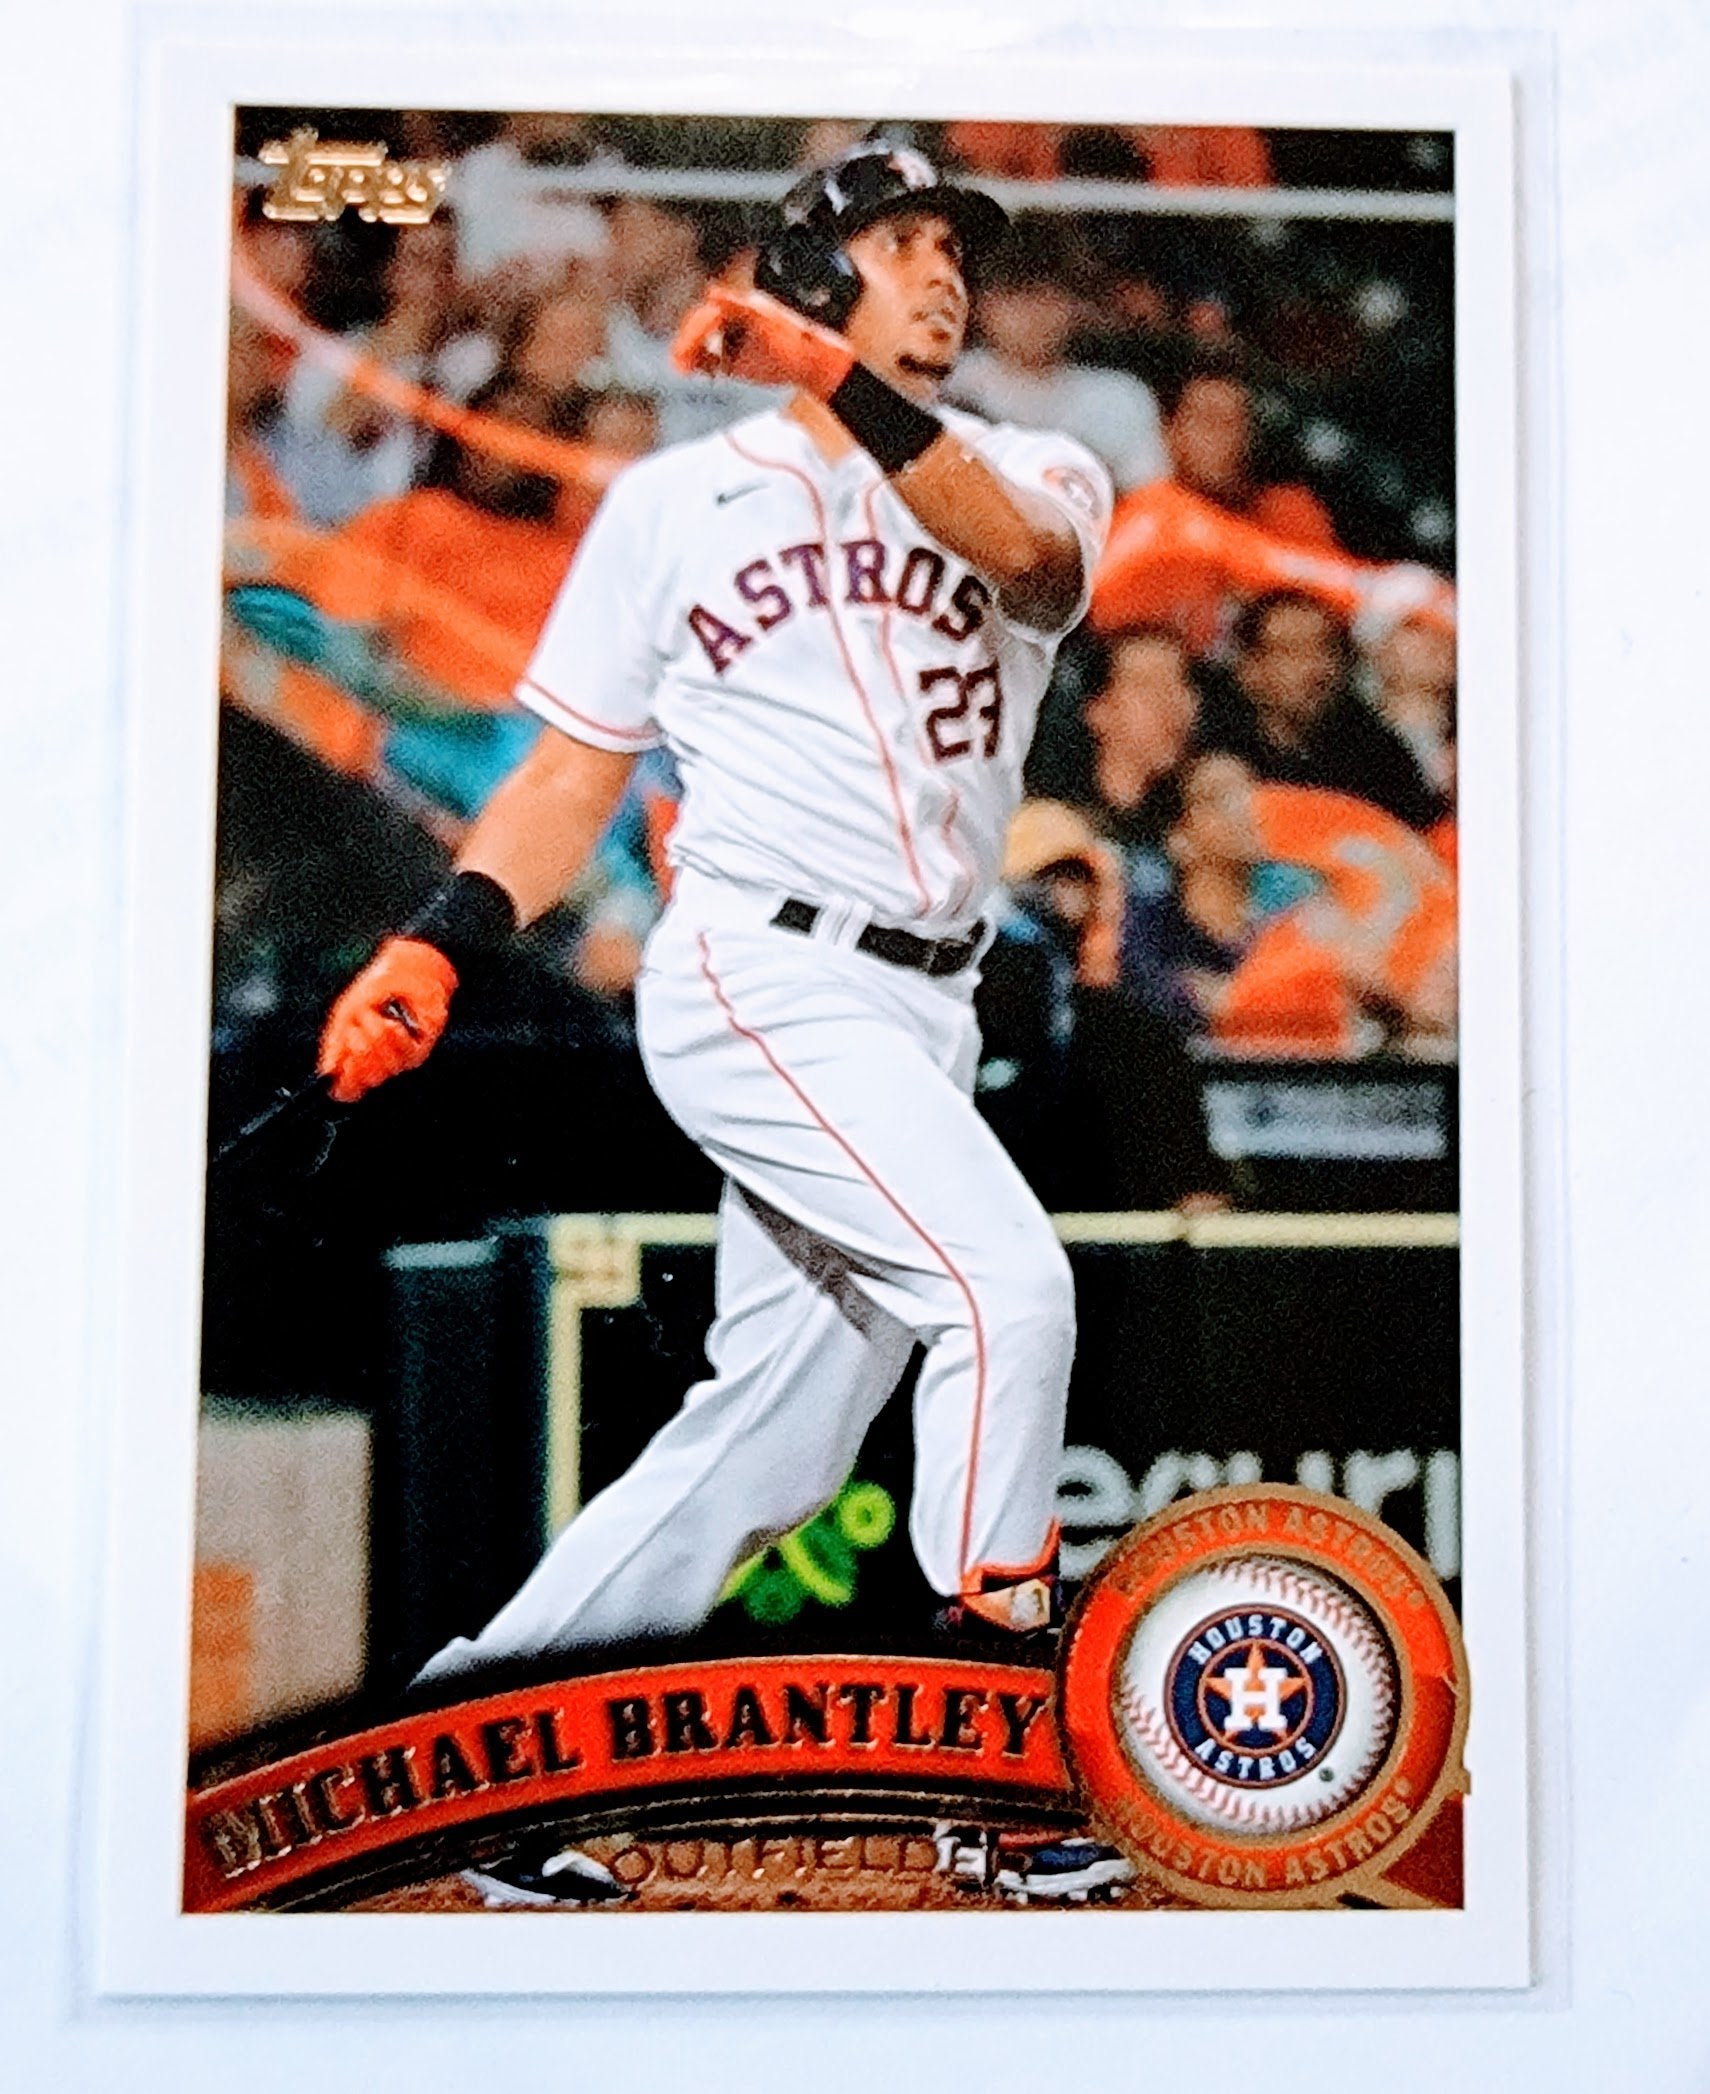 2021 Topps Archives Michael Brantley 2011 Baseball Trading Card SMCB1 simple Xclusive Collectibles   